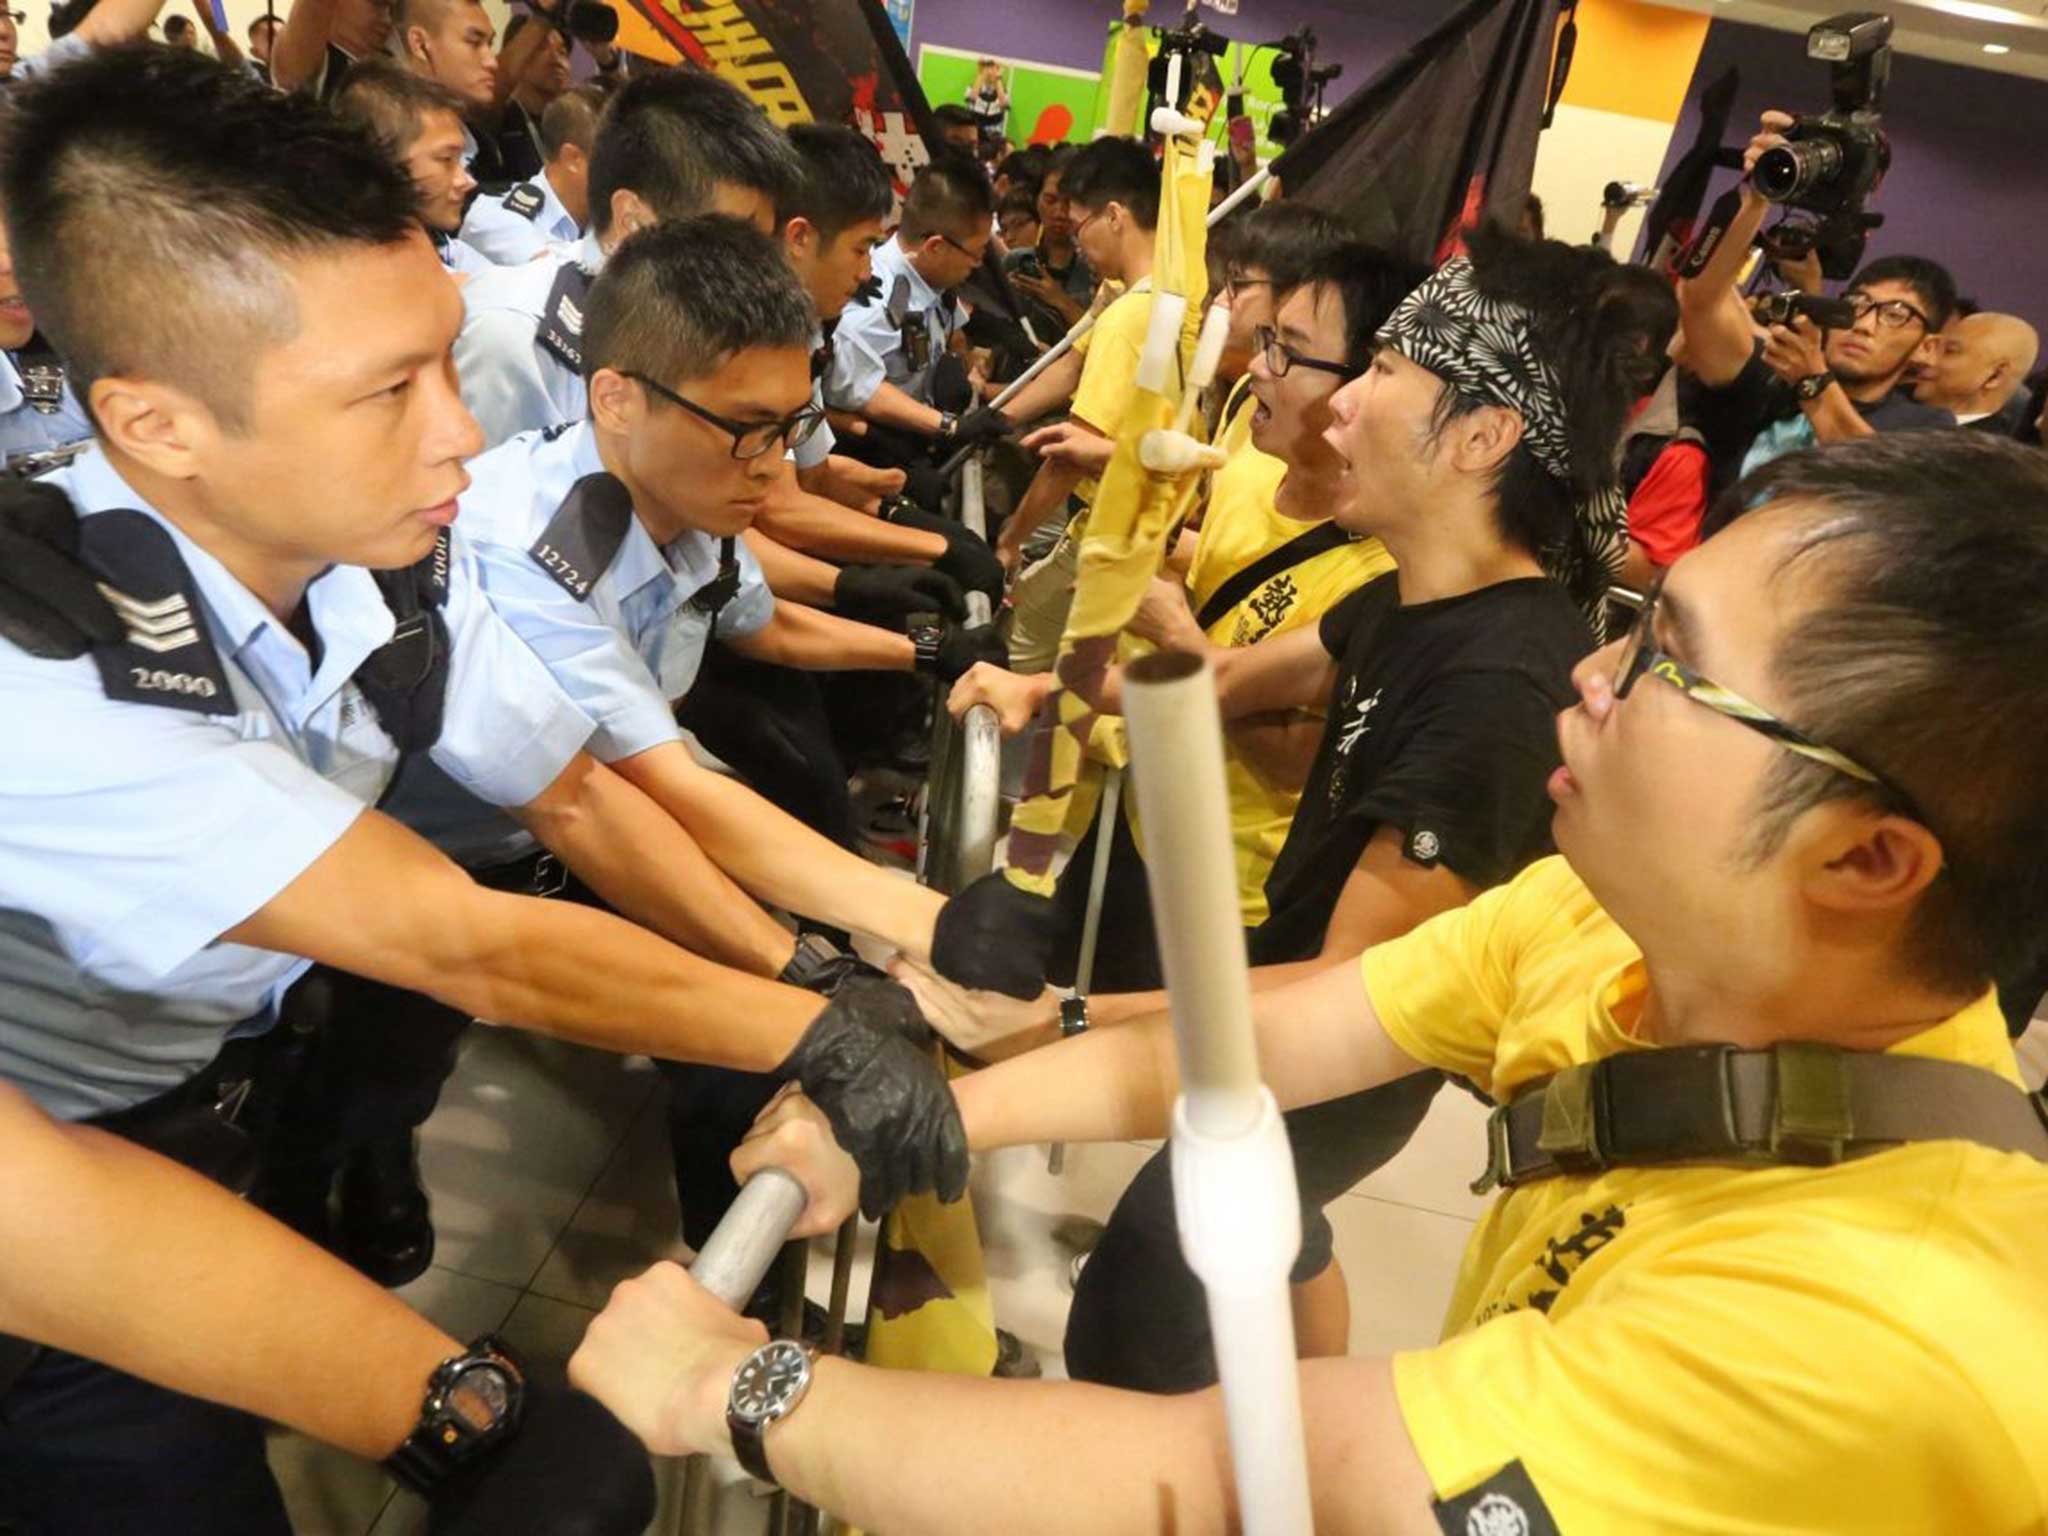 Pro-democracy protesters clashing with police officers outside the Hong Kong government complex